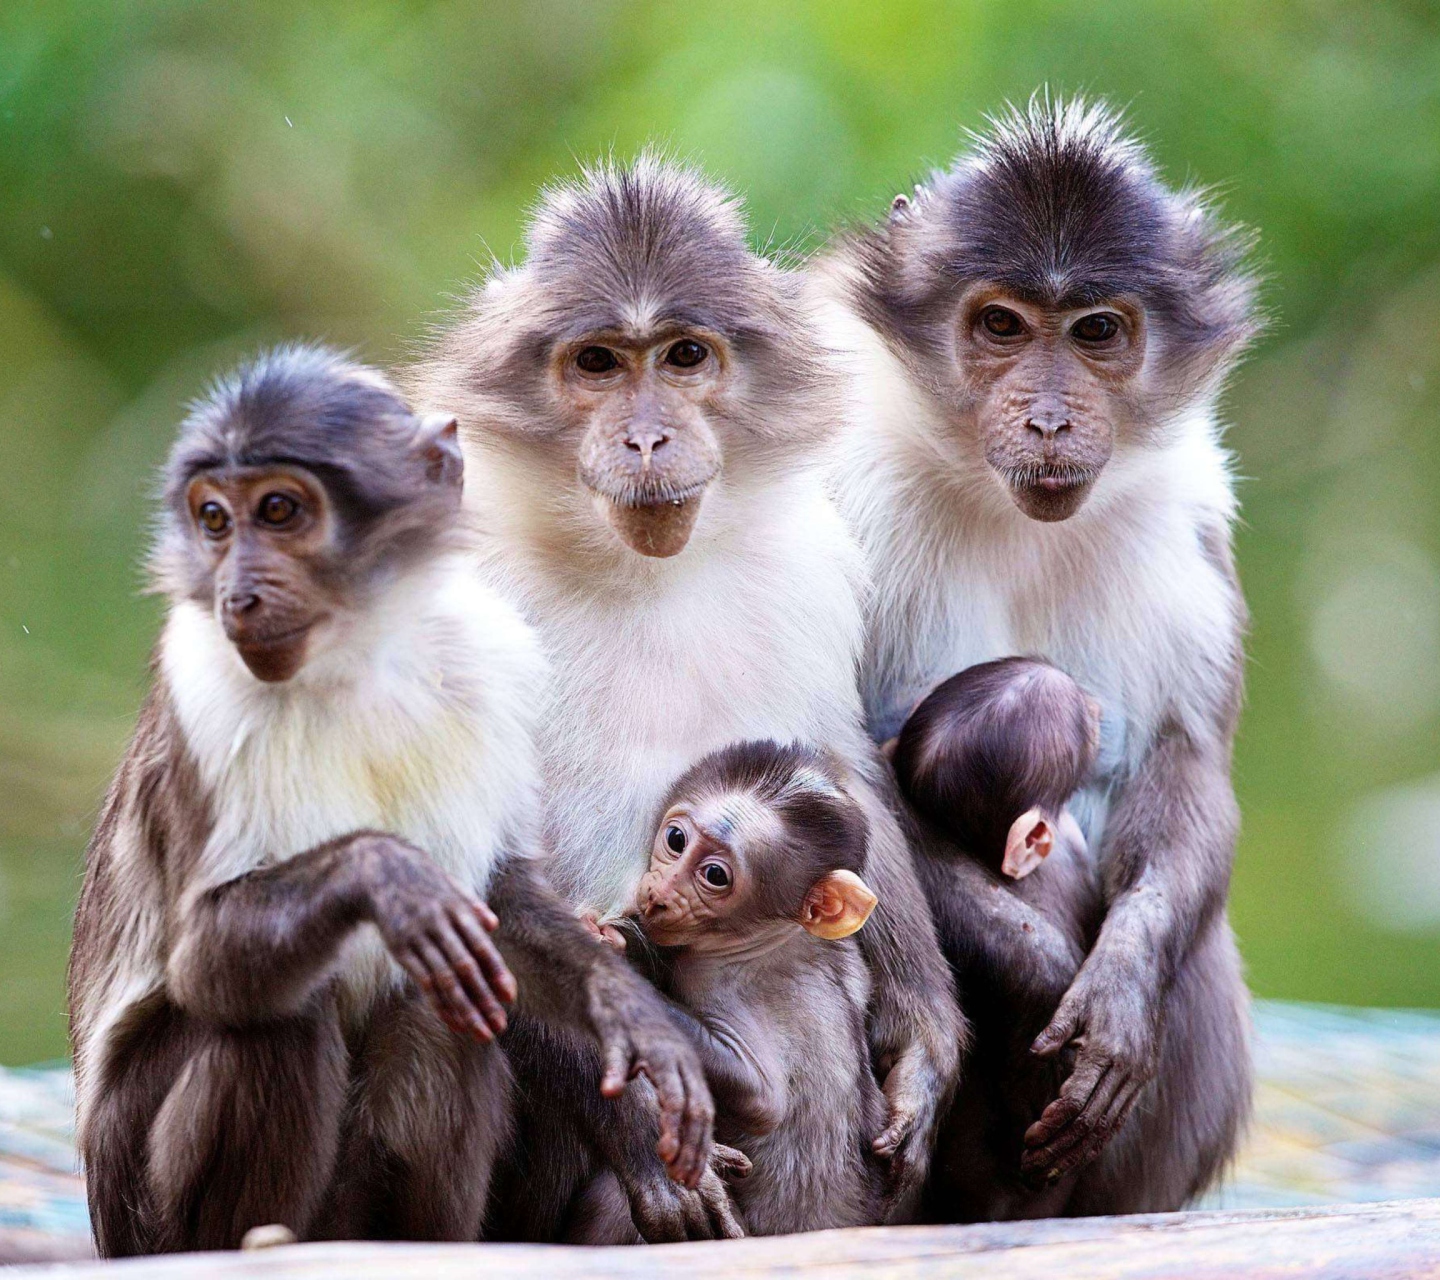 Funny Monkeys With Their Babies wallpaper 1440x1280